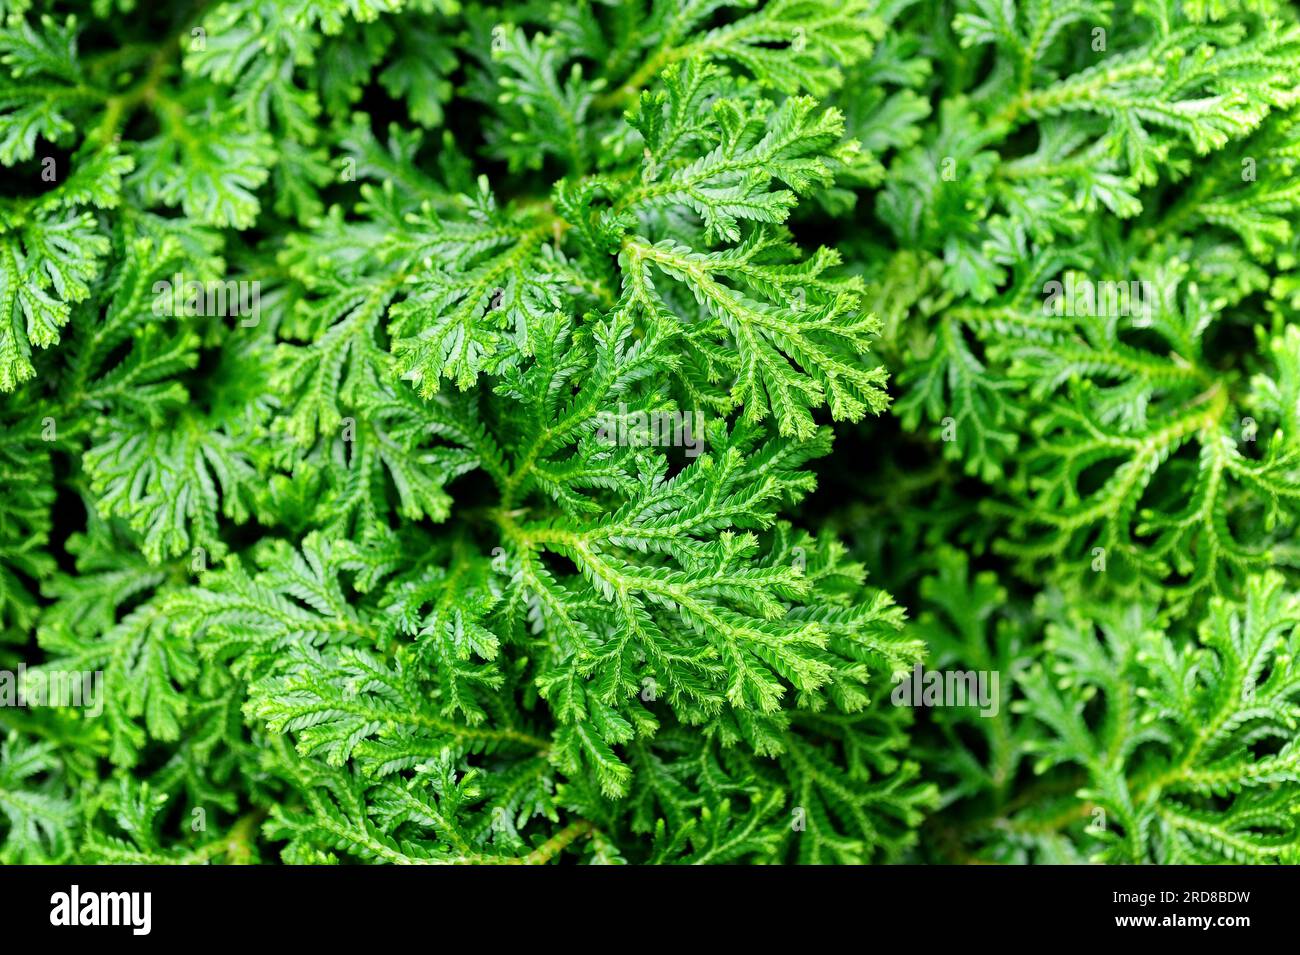 Martens spikemoss or variegated spikemoss (Selaginella martensii) is a lycopodium native to Mexico and Central America. Lycopodiophyta. Selaginellacea Stock Photo